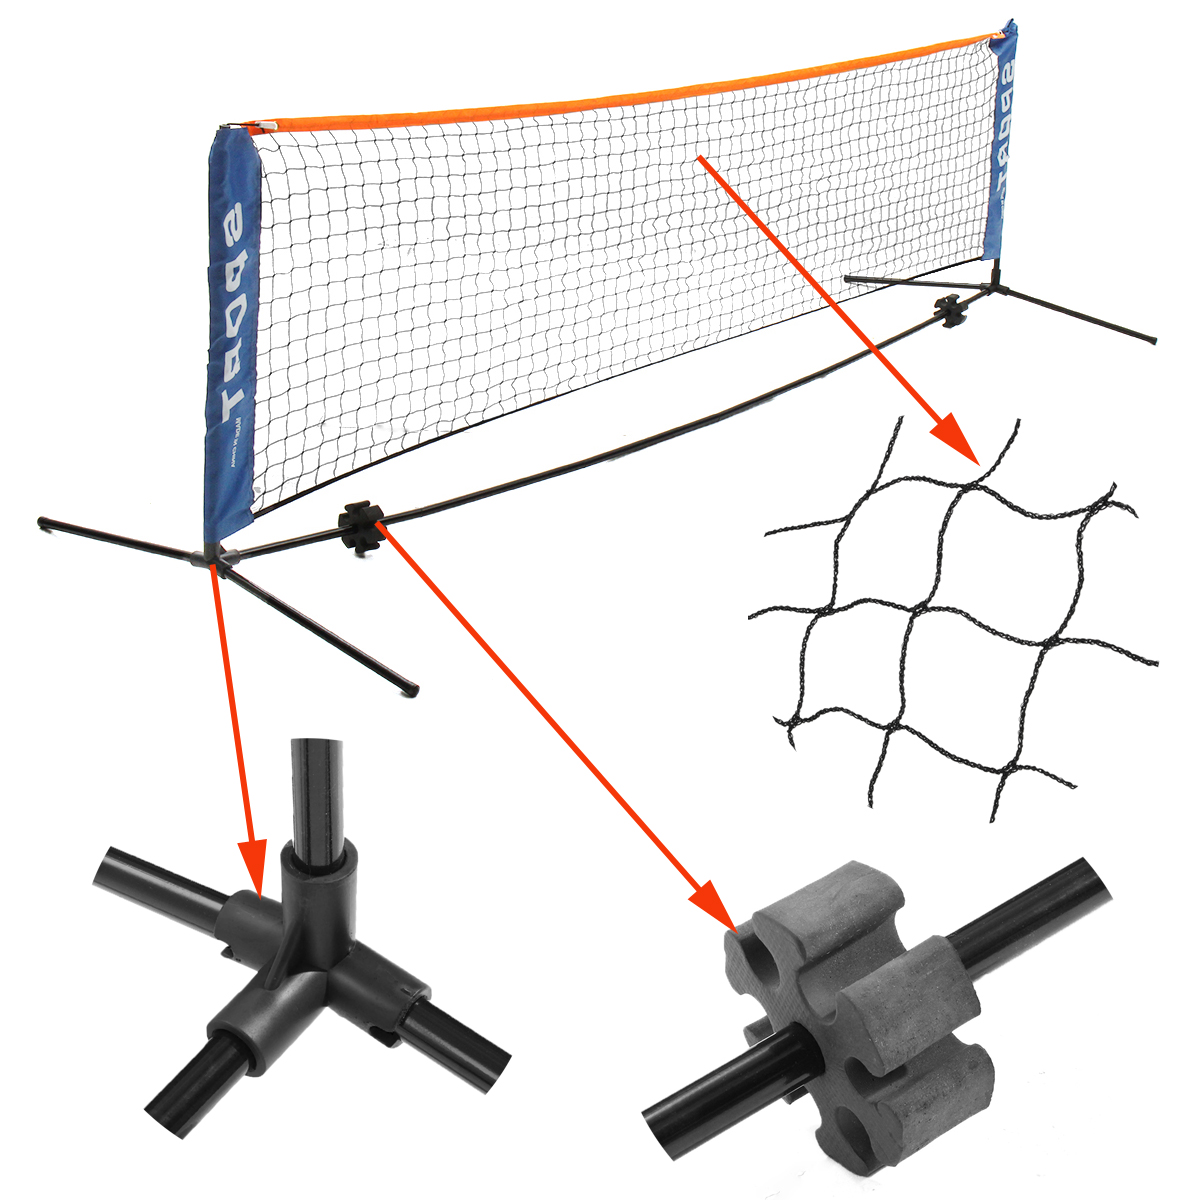 3x085M-Tennis-Net-Standard-Steel-Cable-Badminton-Volleyball-Training-Net-Team-Sport-Net-Frame-with-S-1723822-3